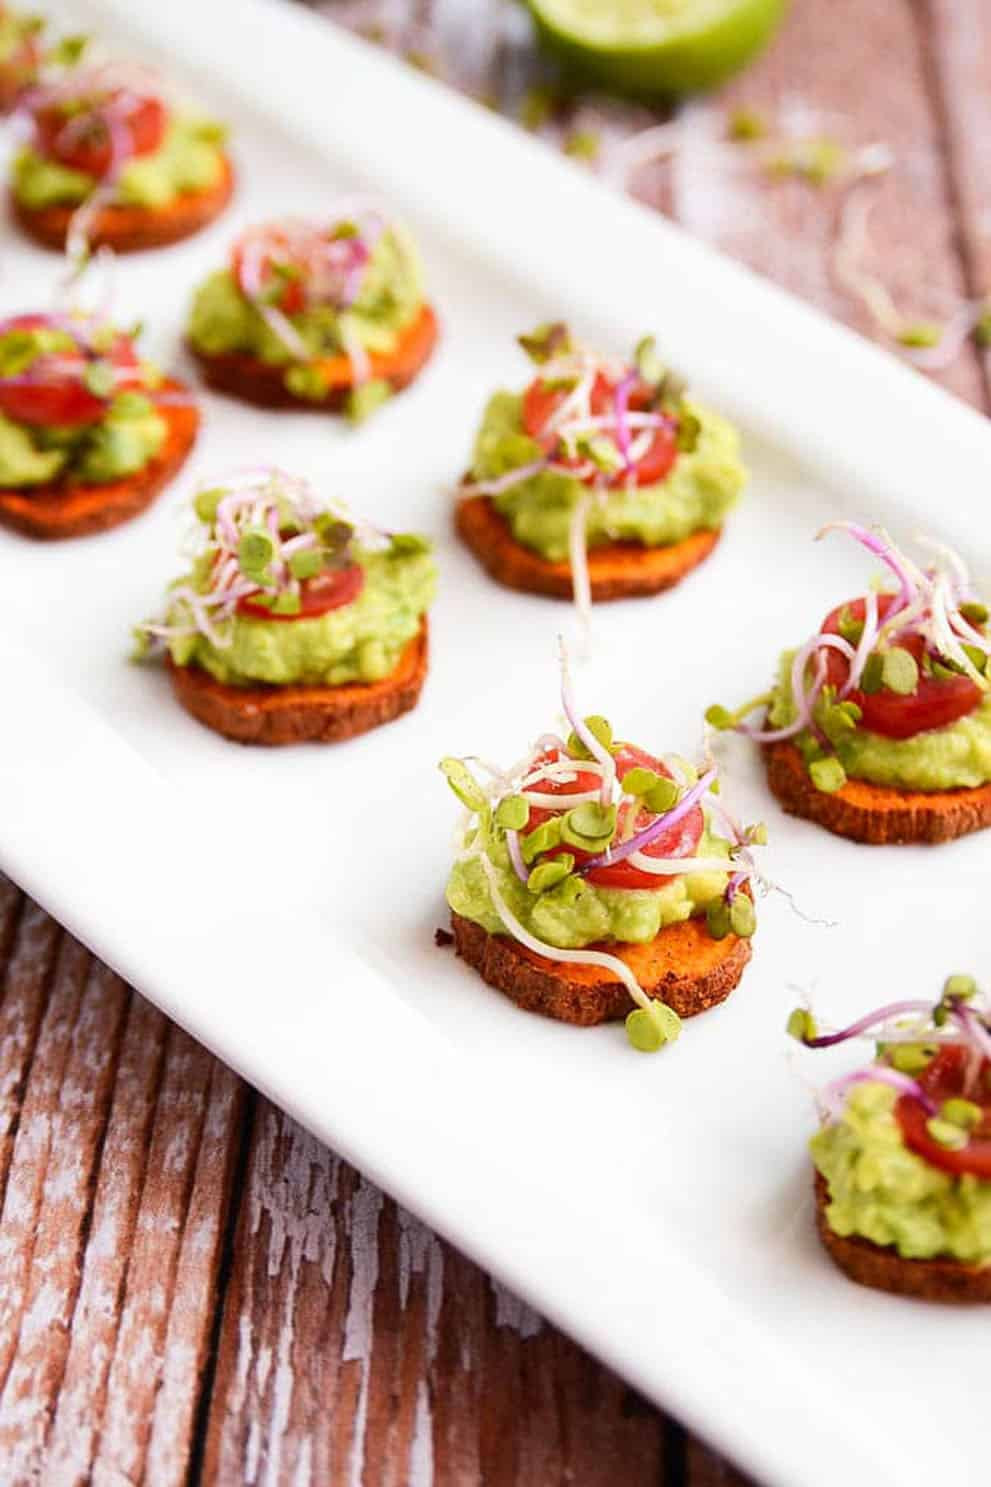 Vegan Appetizer Recipes Cocktail Party Awesome the top 30 Ideas About Vegan Appetizer Recipes Cocktail